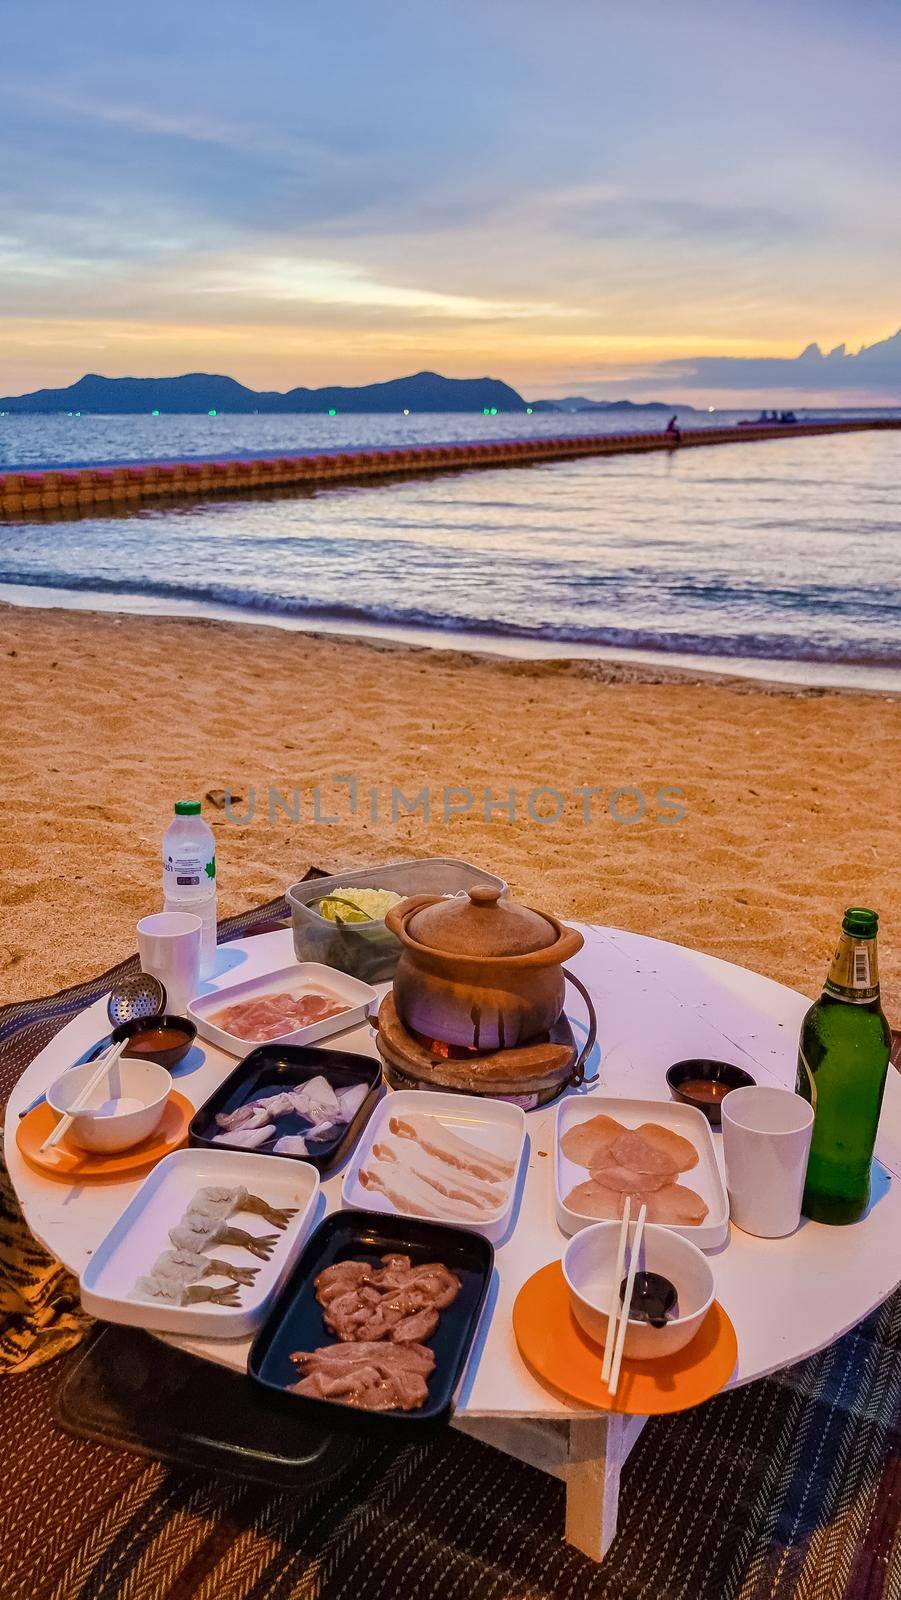 women bbq cooking noodle soup during sunset in Thailand Ban Amphur beach. relaxing with bbq Thai traditional on a tropical beach with palm trees and hammock during sunset